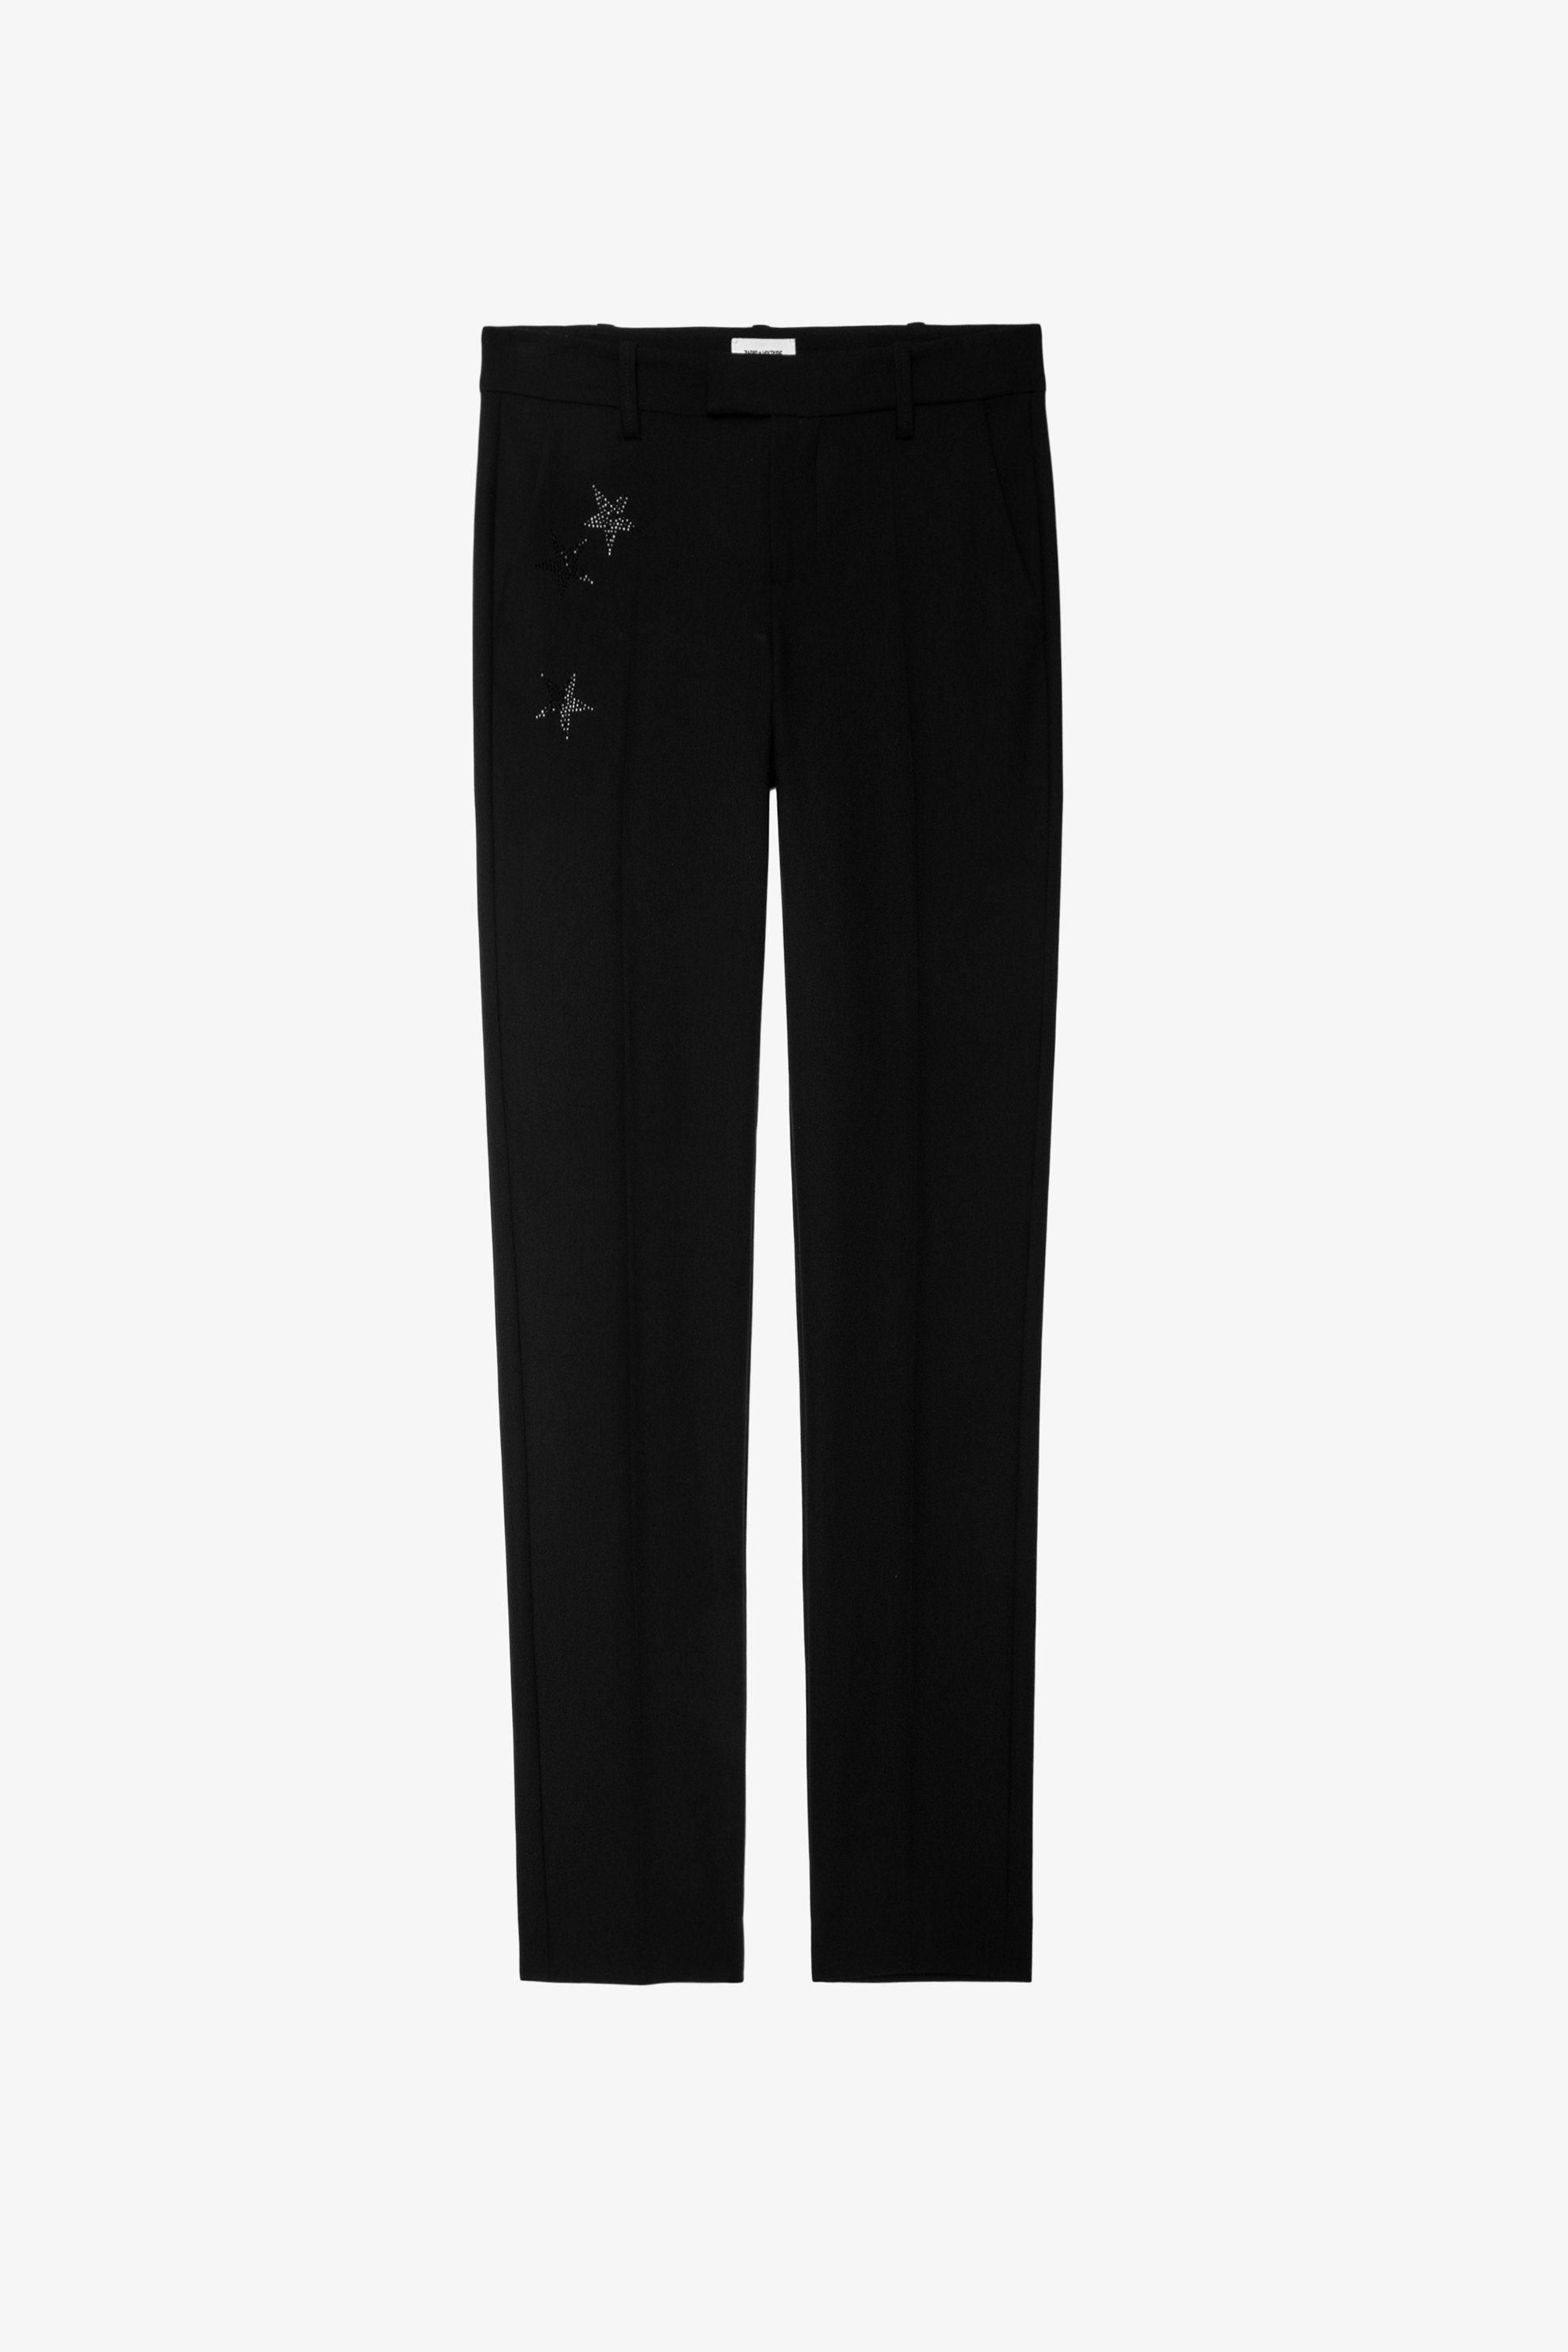 Prune Strass Star Trousers - Woman’s Zadig&Voltaire black suit trousers with rhinestone stars on the pocket.